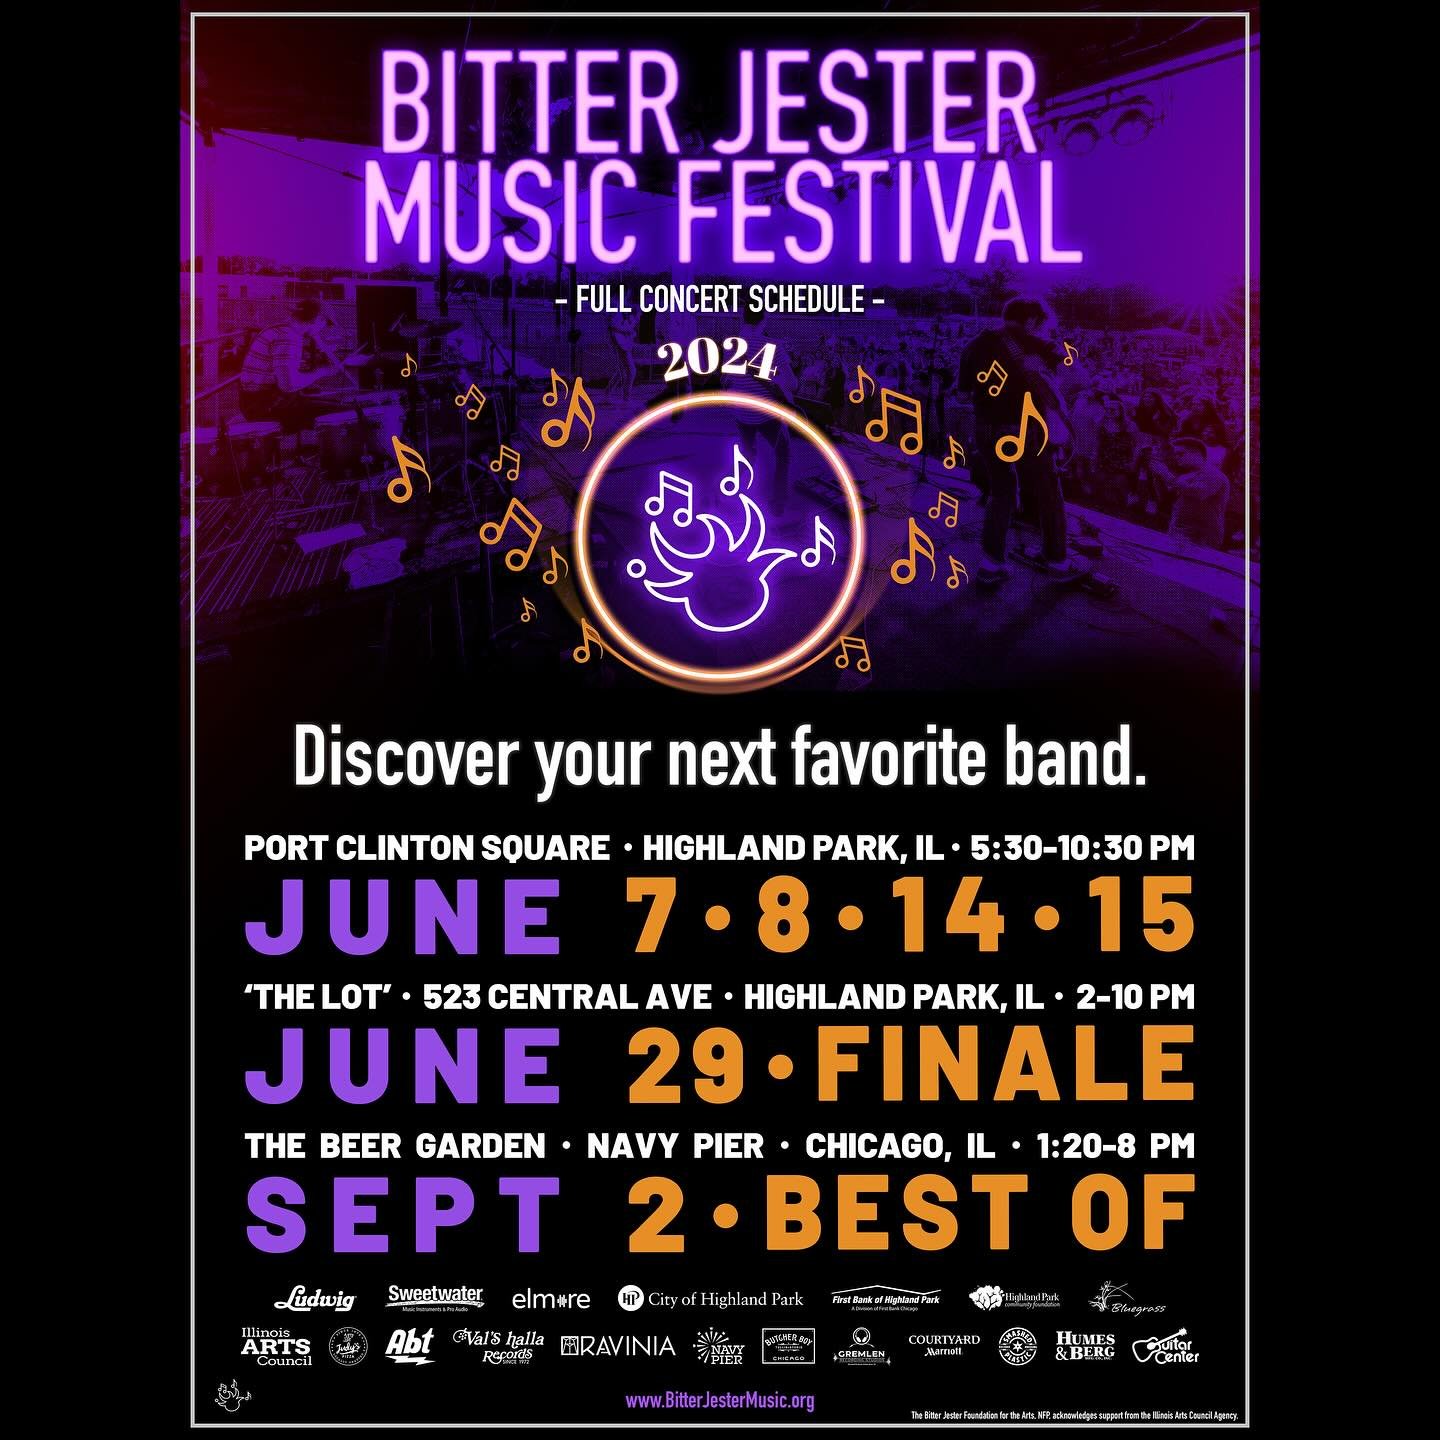 MARK YOUR CALENDARS! Then discover your next favorite band (or solo artist!) at Bitter Jester this summer! 46 artists from across the Midwest &amp; beyond will converge on @downtownhighlandparkil throughout June, 24 of them in competition.

Enjoy bee